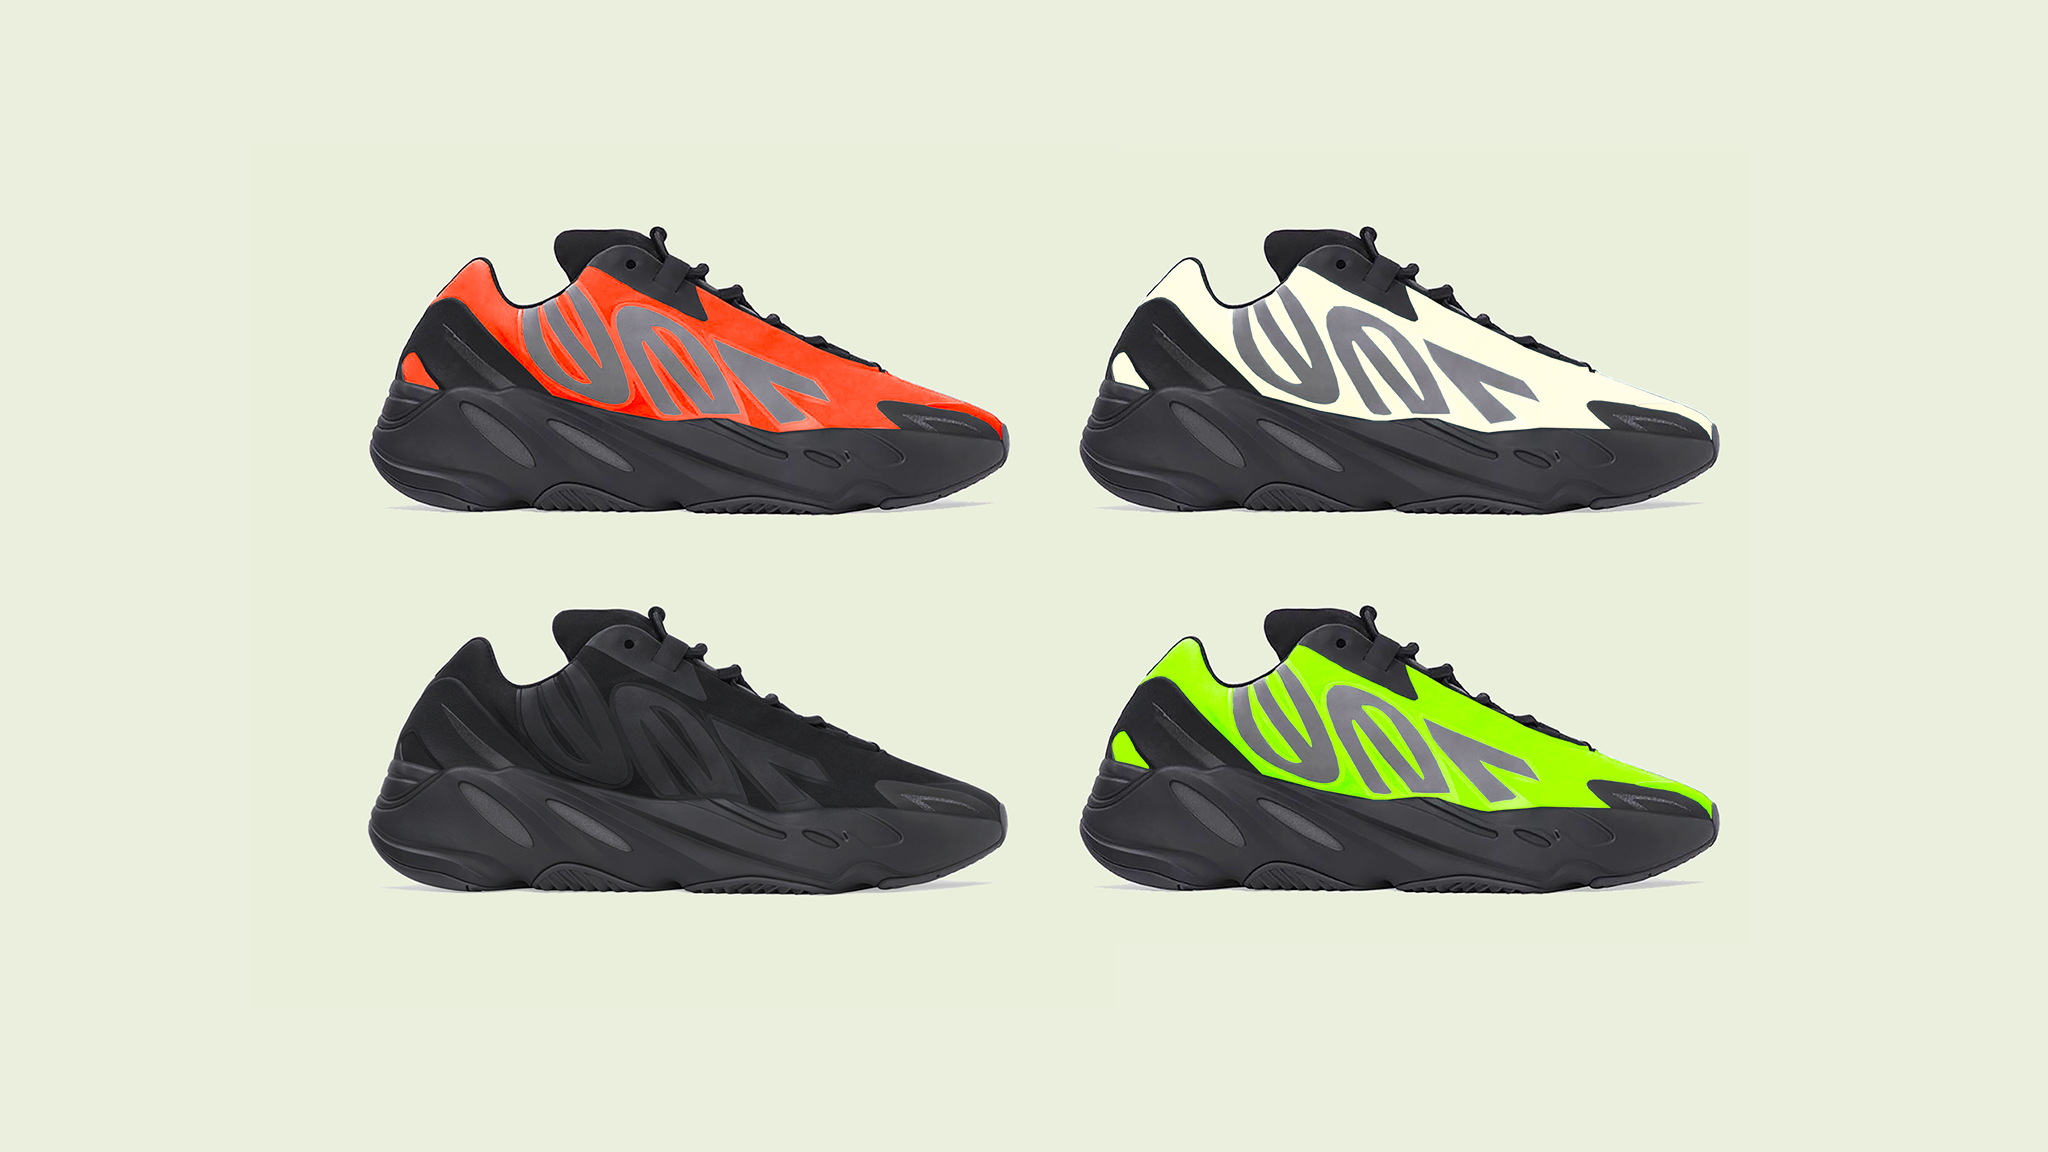 The Adidas Yeezy 700 MNVN Debuts This Spring